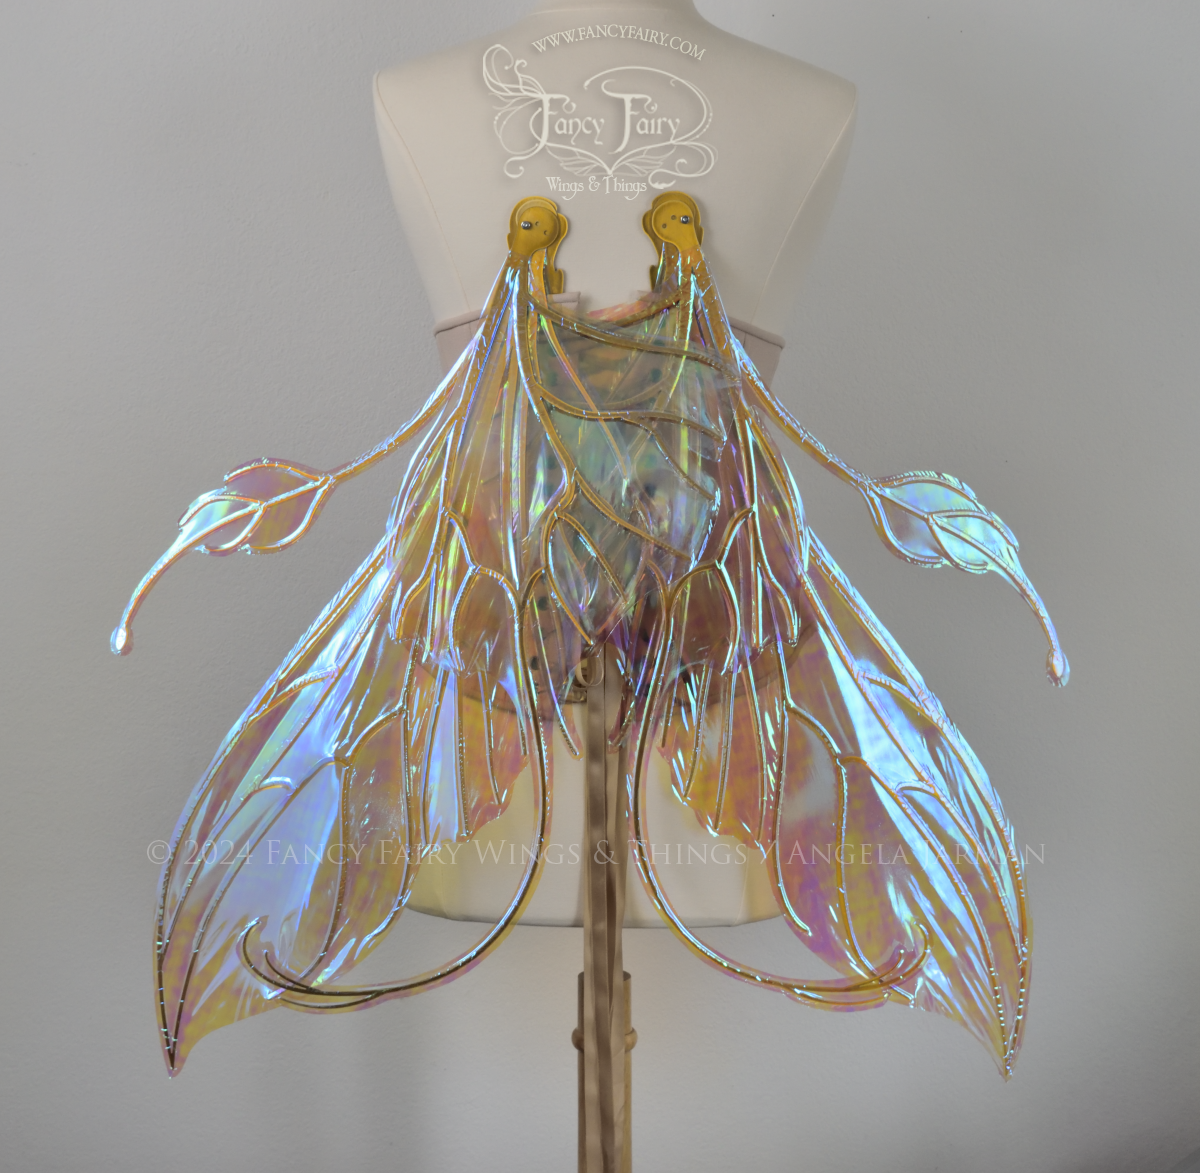 Back view of a dress form wearing an underbust corset & large blue / peach iridescent fairy wings with elongated upper panels & antennae with bottom panels that have a tail curving upwards, gold veins, in resting position